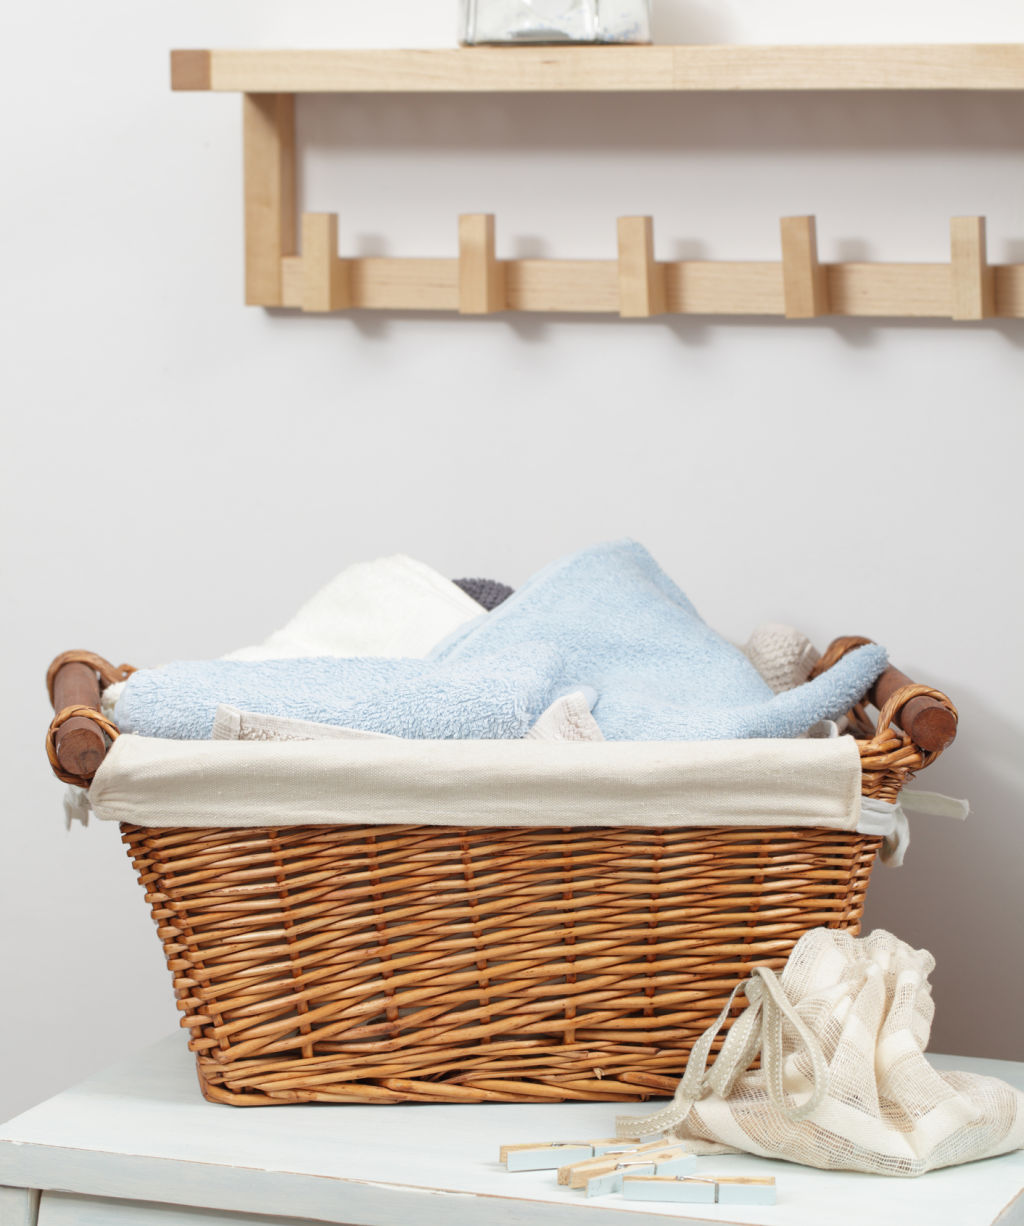 Basket with towels and clothespins in the bag in laundry room